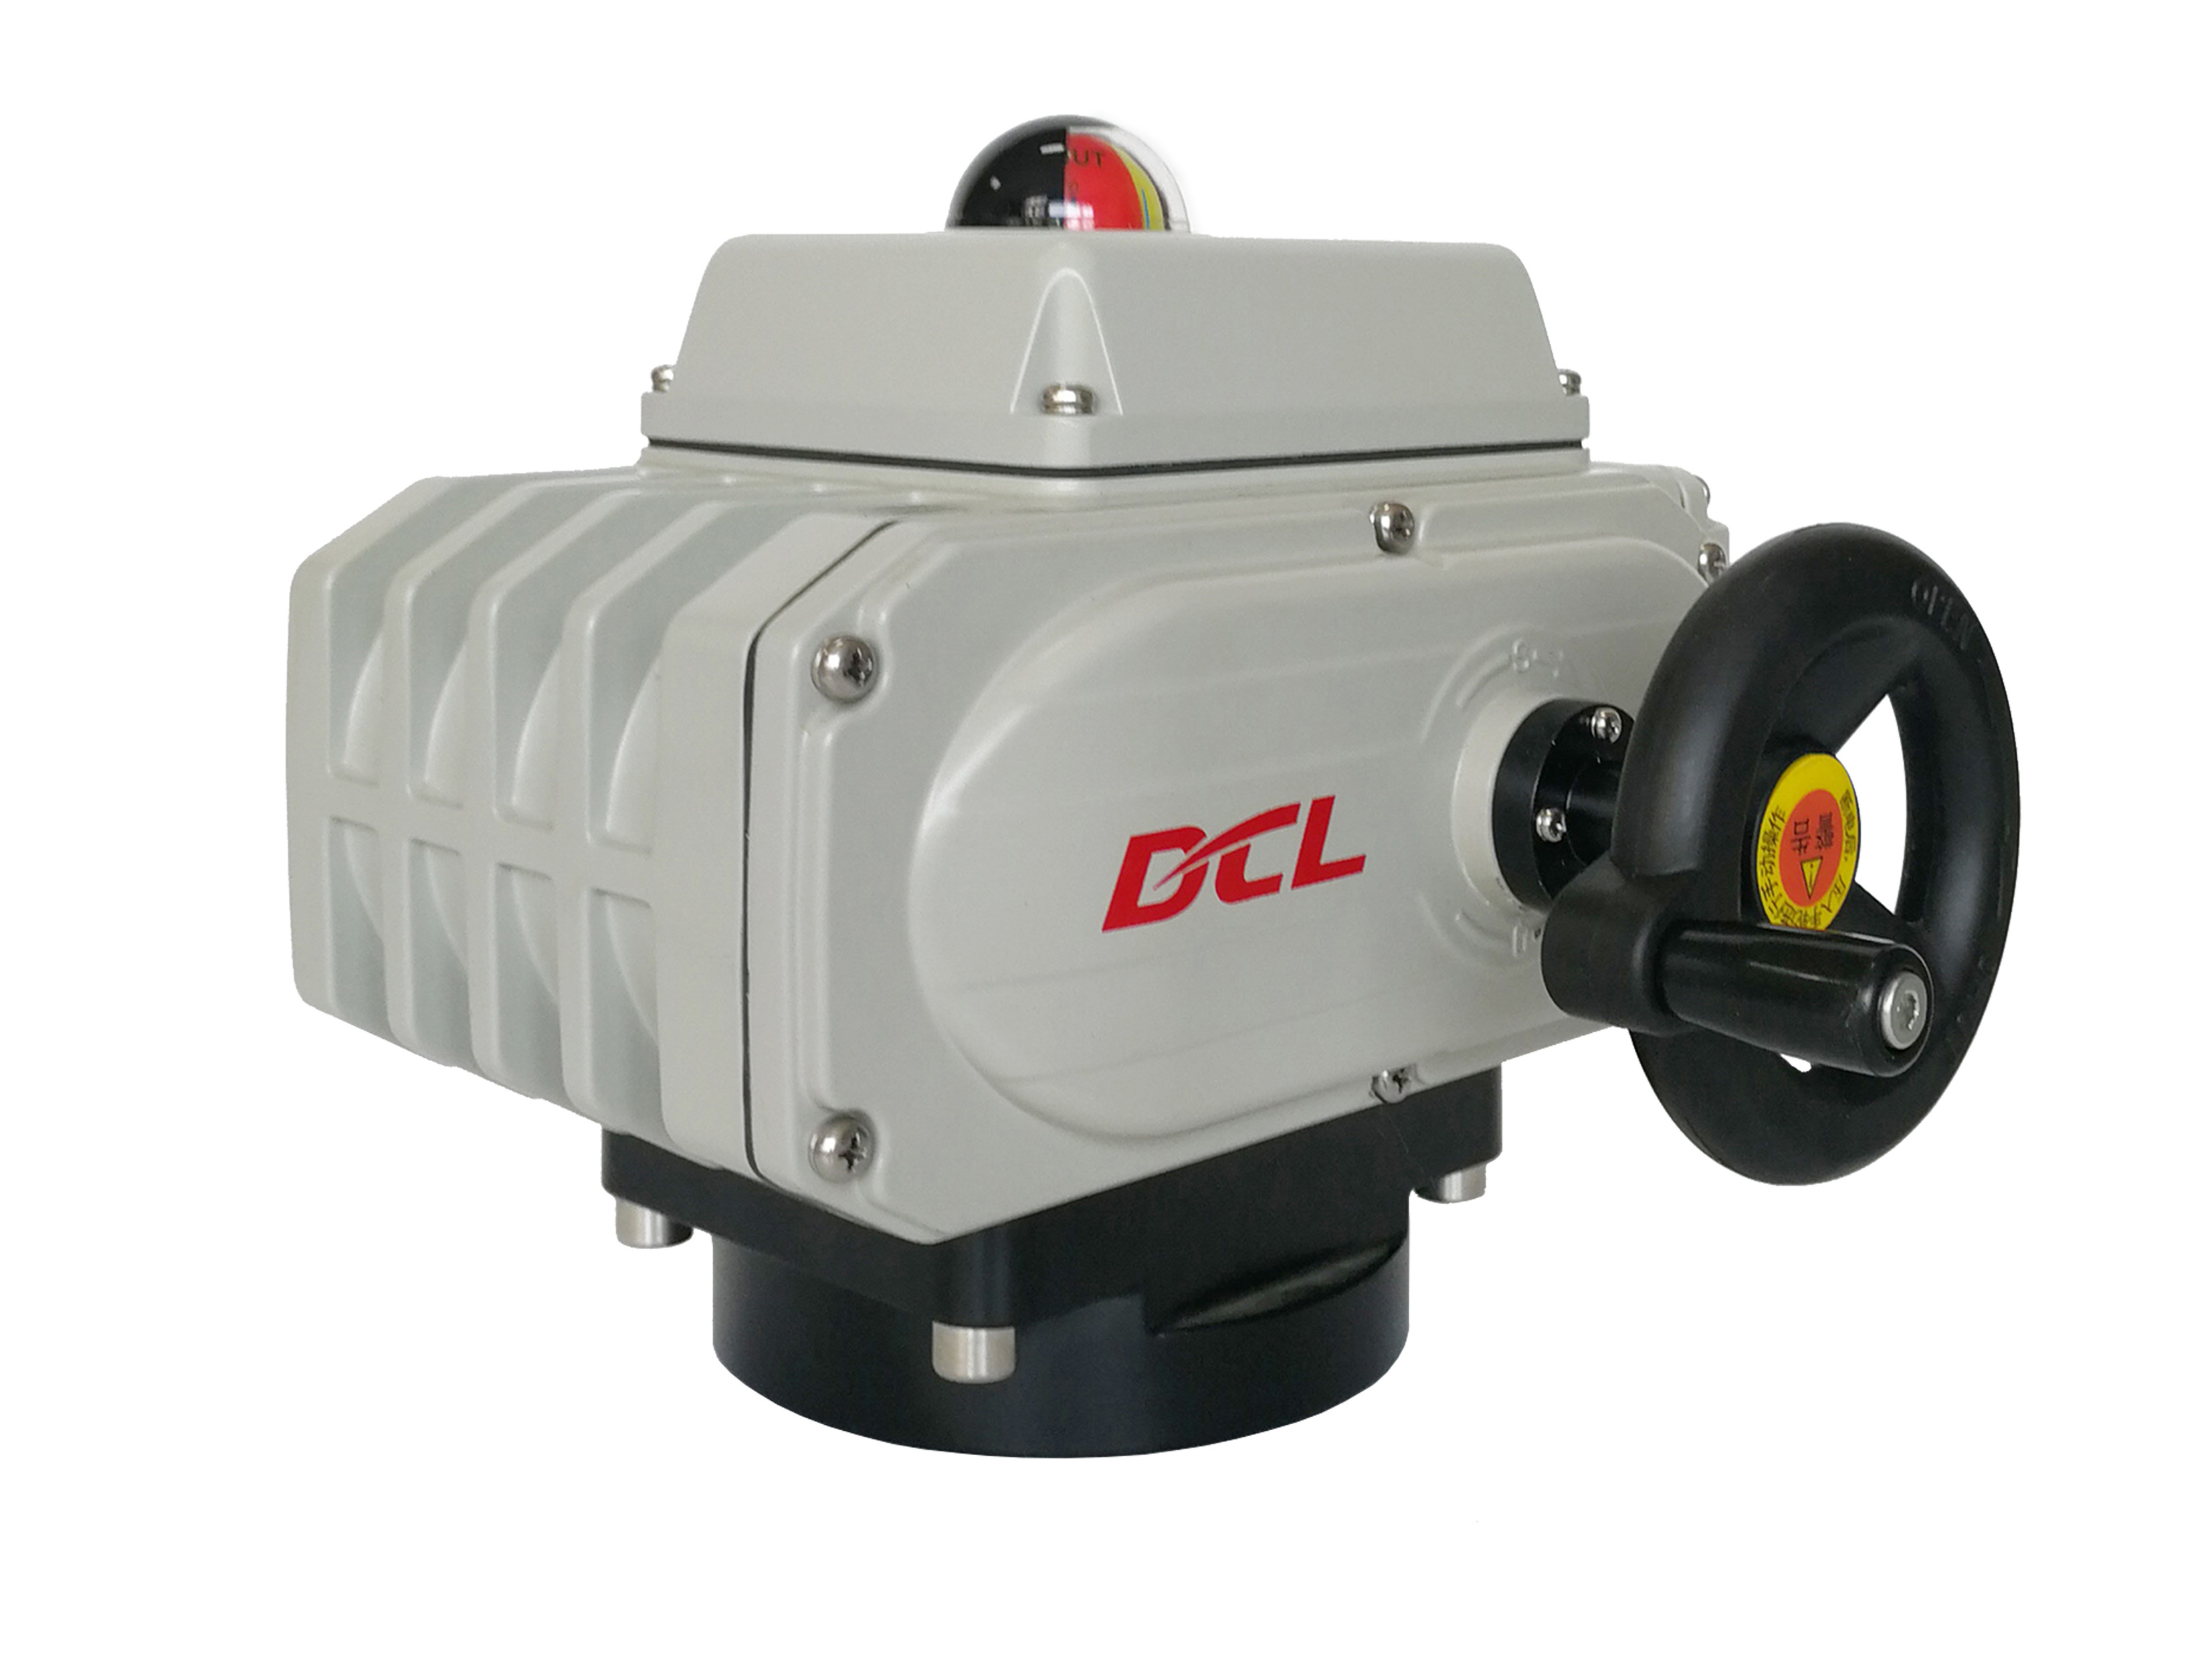 Quality RoHS 22125in.Lbs IP67 DCL Electric Valve Actuator for sale